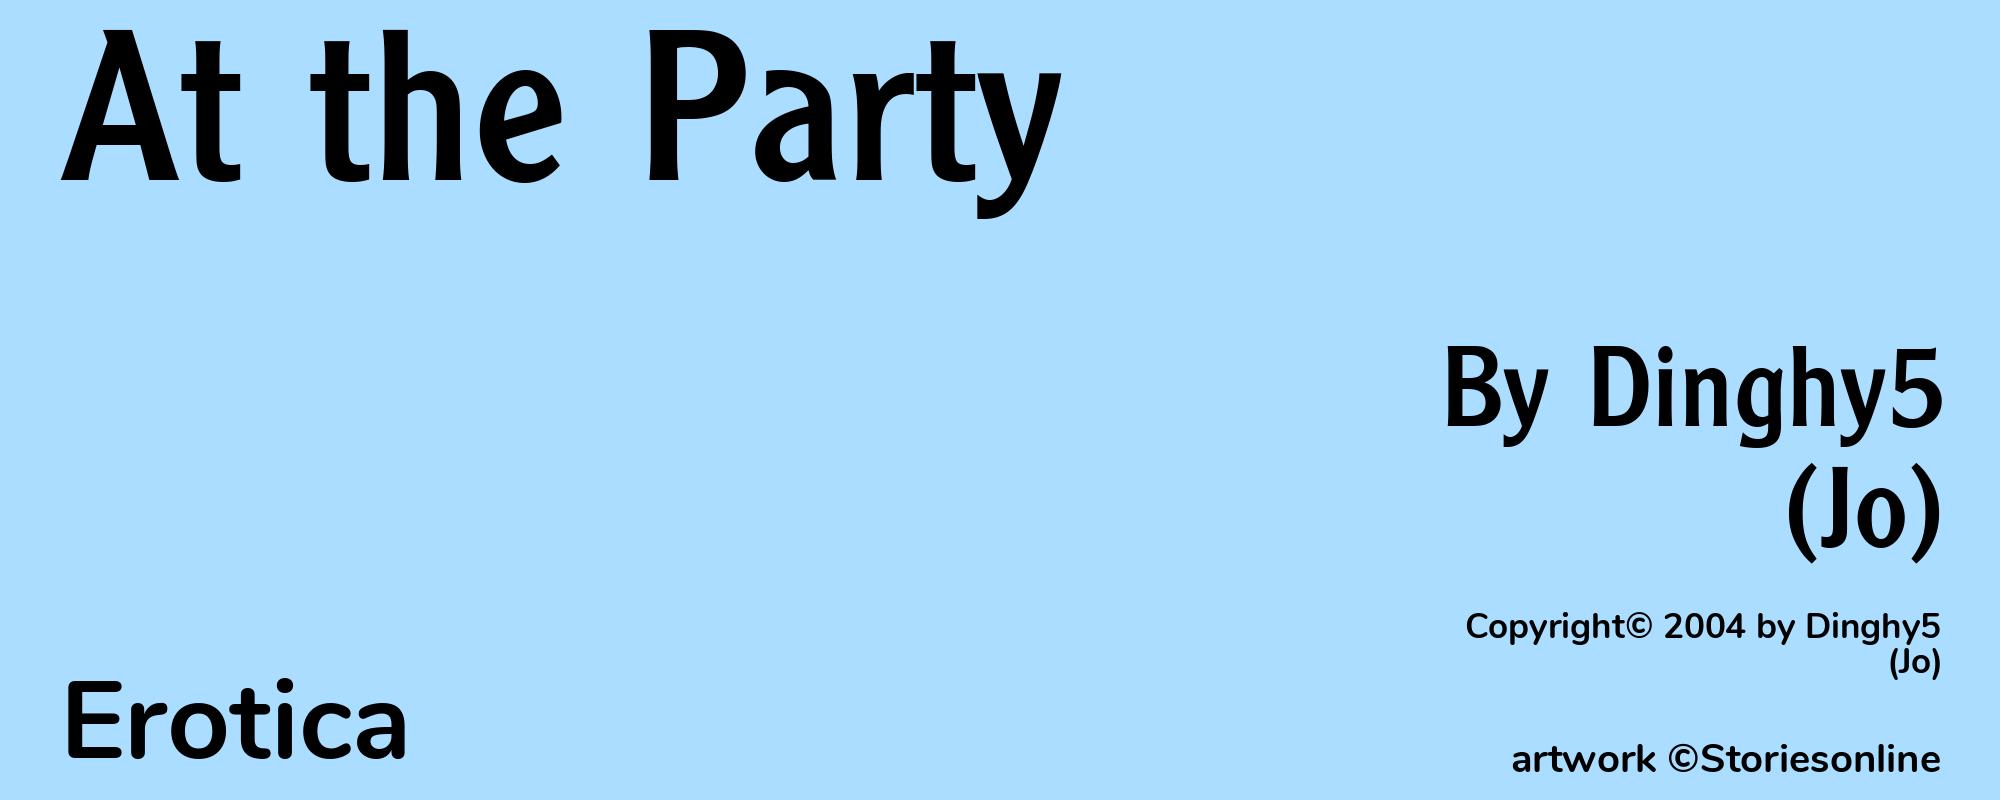 At the Party - Cover